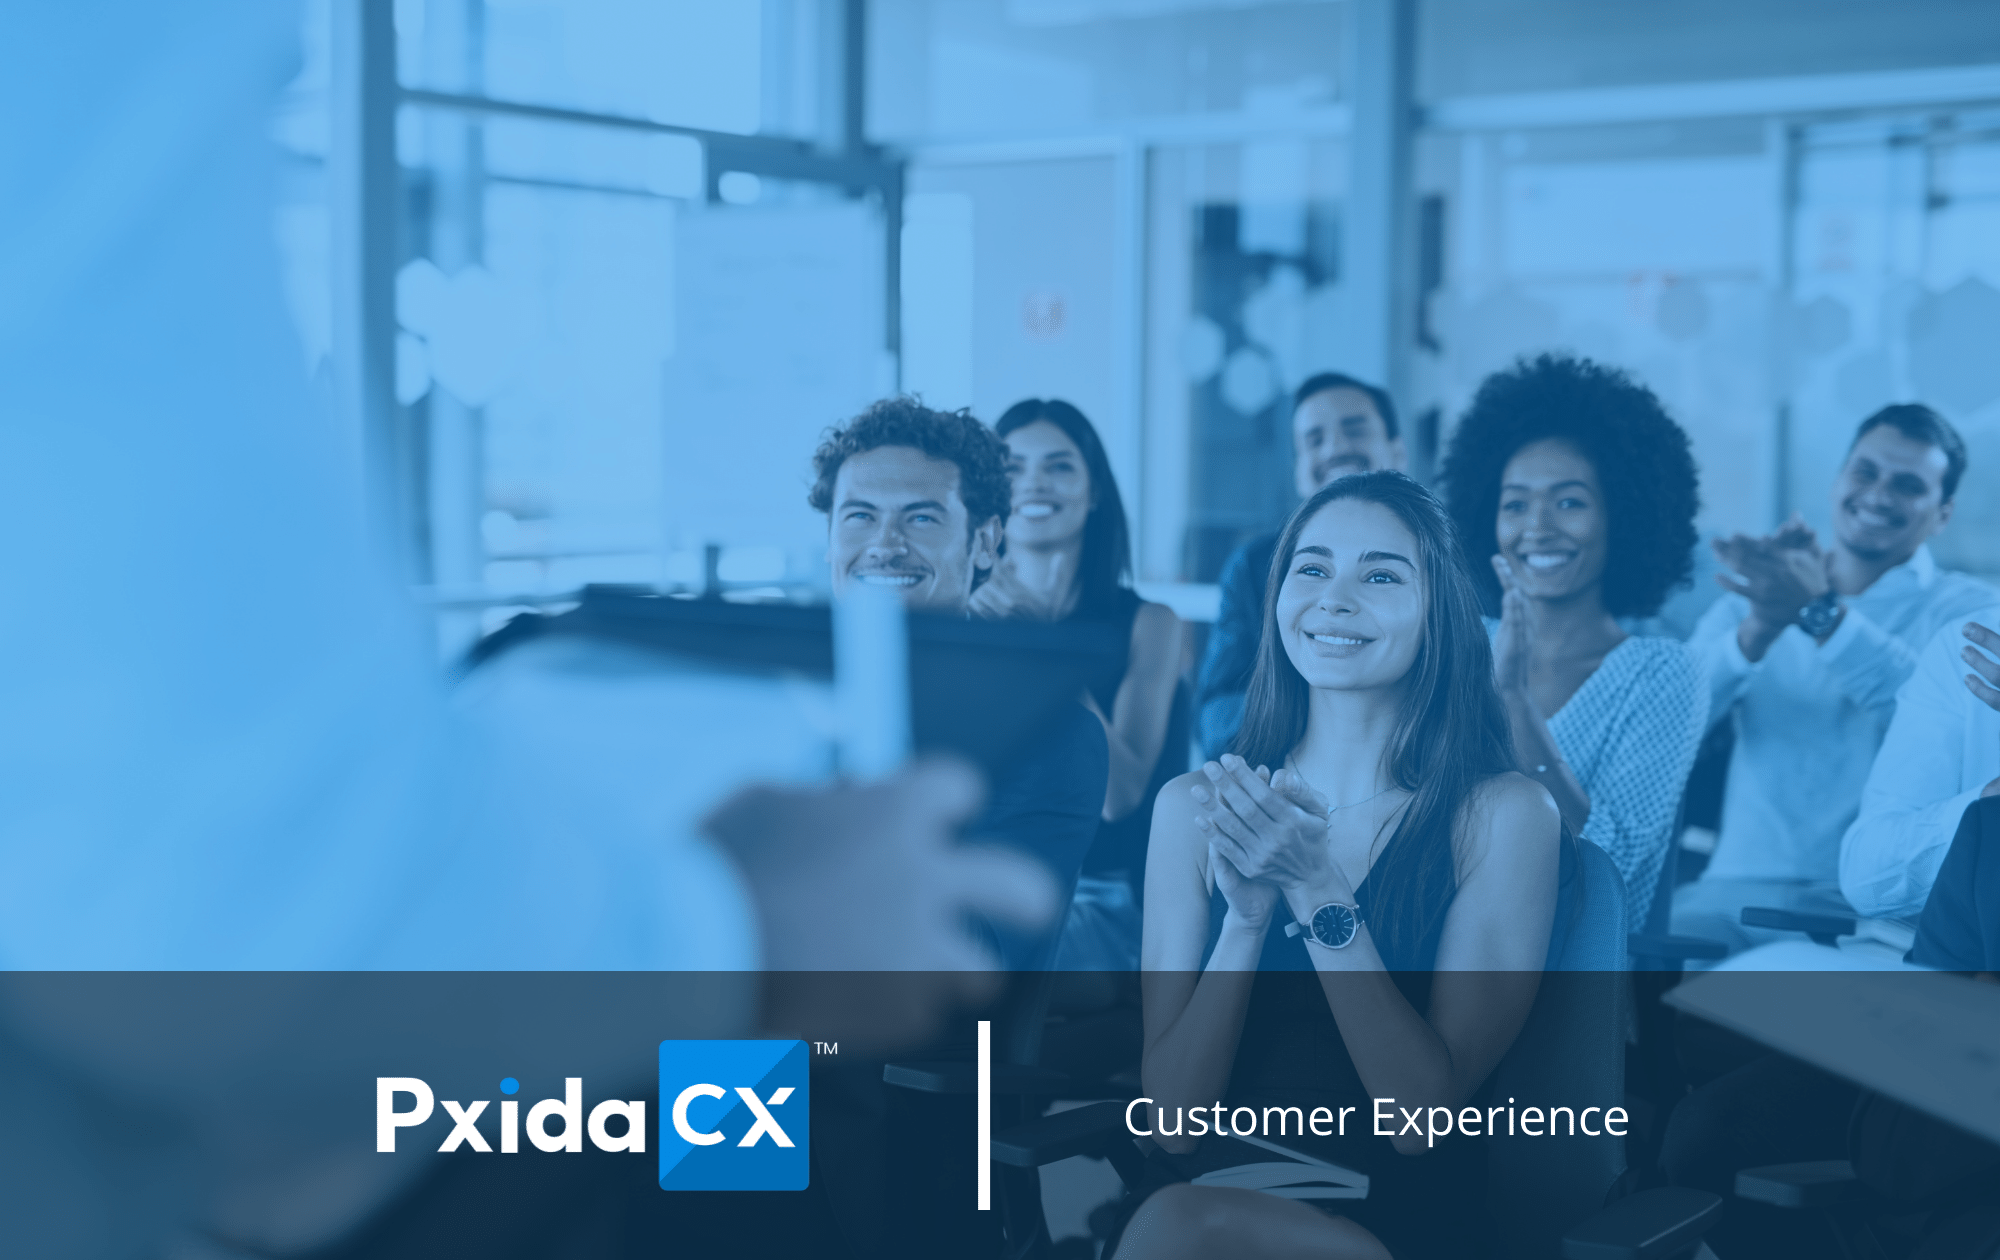 10 Customer Experience Quotes to Inspire Your Team